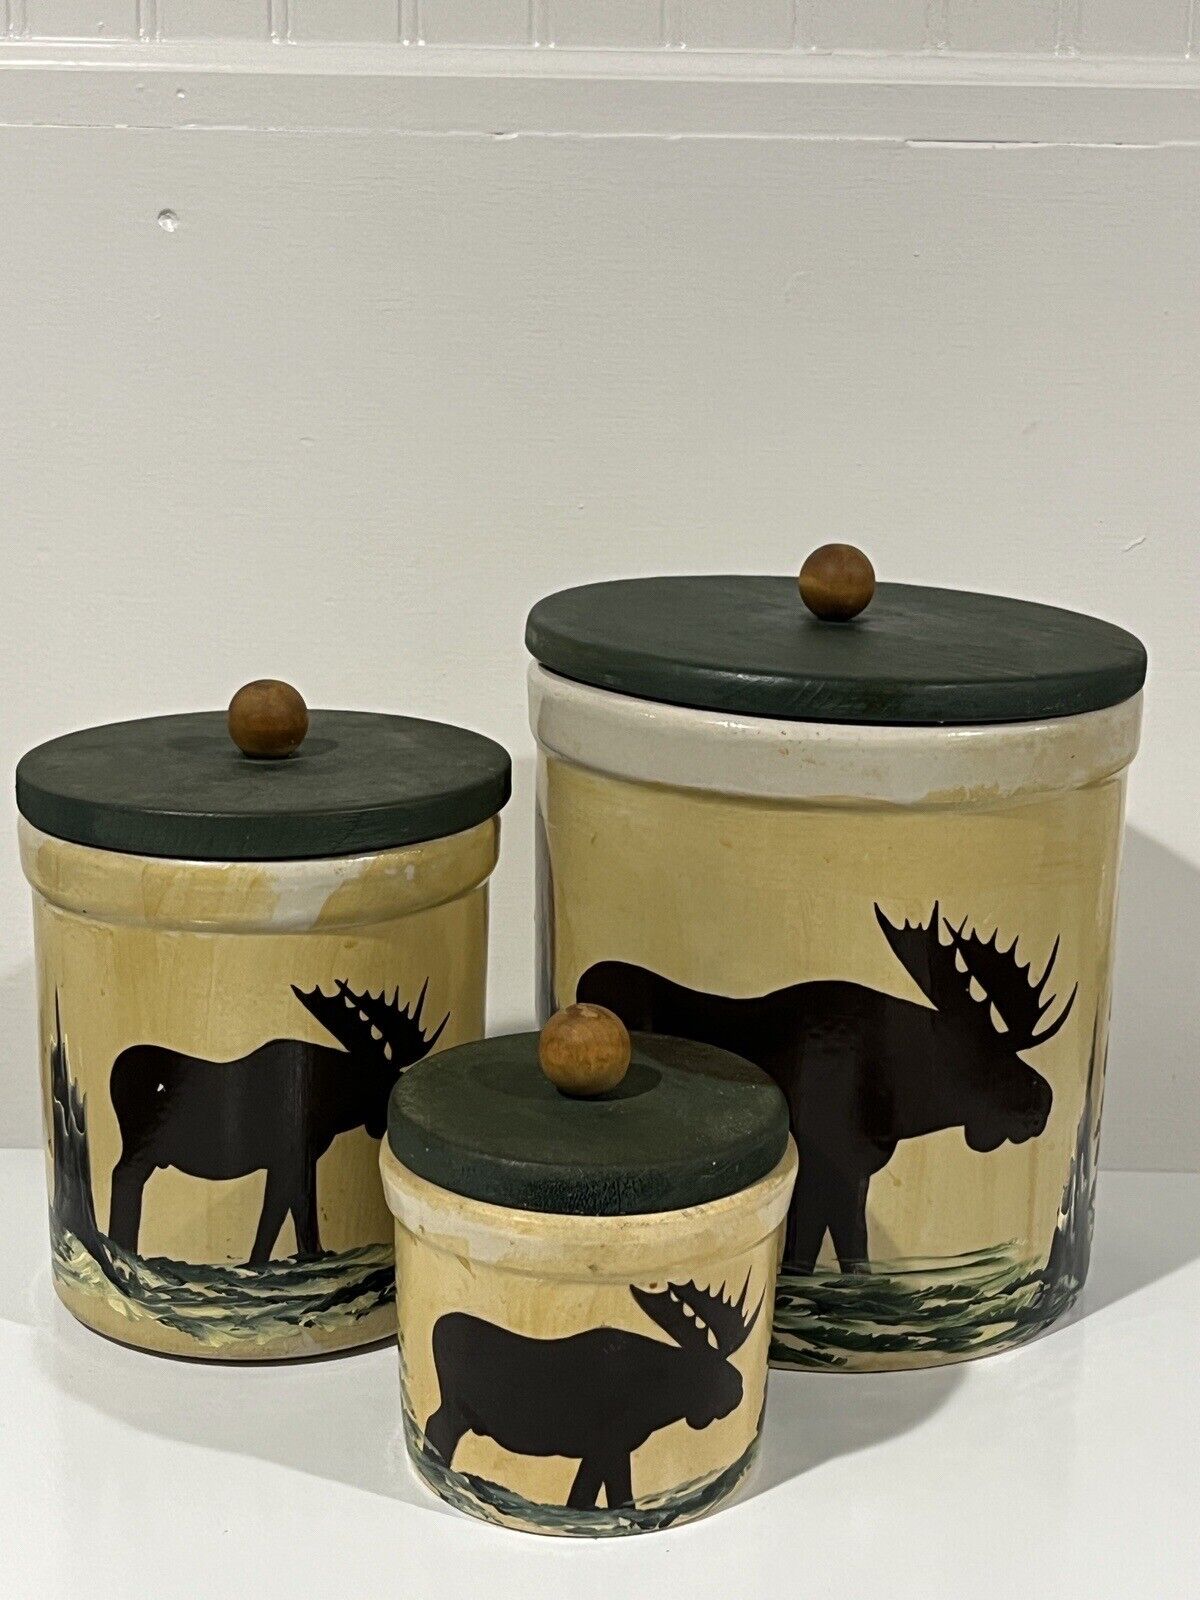 RRP (Robinson Ramsbottom Pottery) Painted Crocks/Canister from Roseville, Ohio